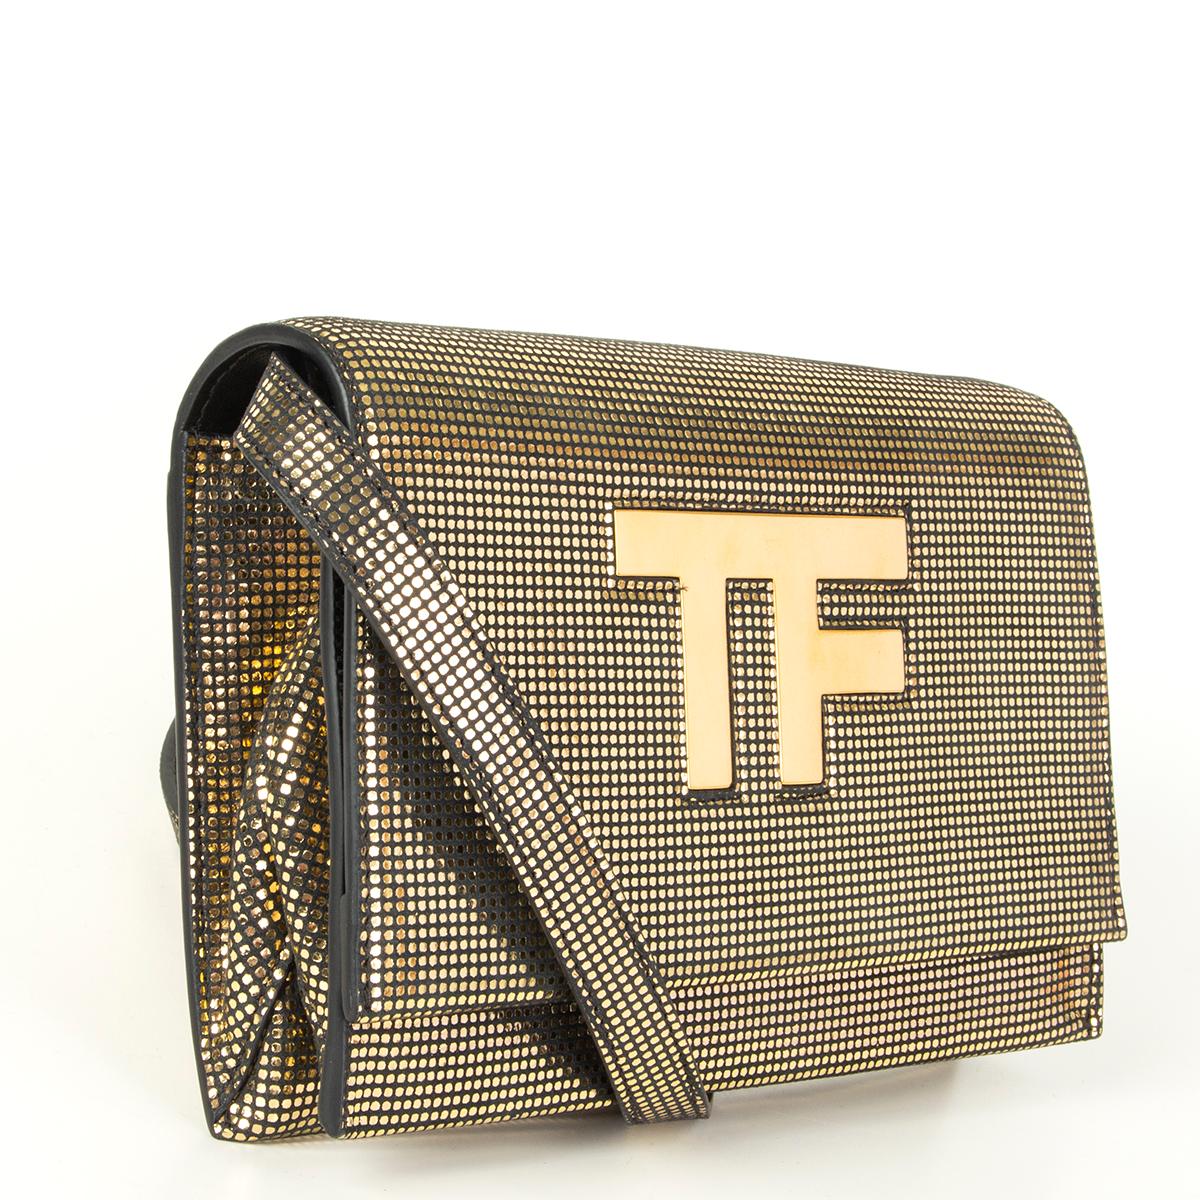 Tom Ford 'TF' logo corss-body/clutch bag in pinted gold-tone calfskin featuring a slit pocket on the back side. Opens with a flap and is lined in black calfskin and microfibre with two credit card slots, one open pocket and one zip pocket.